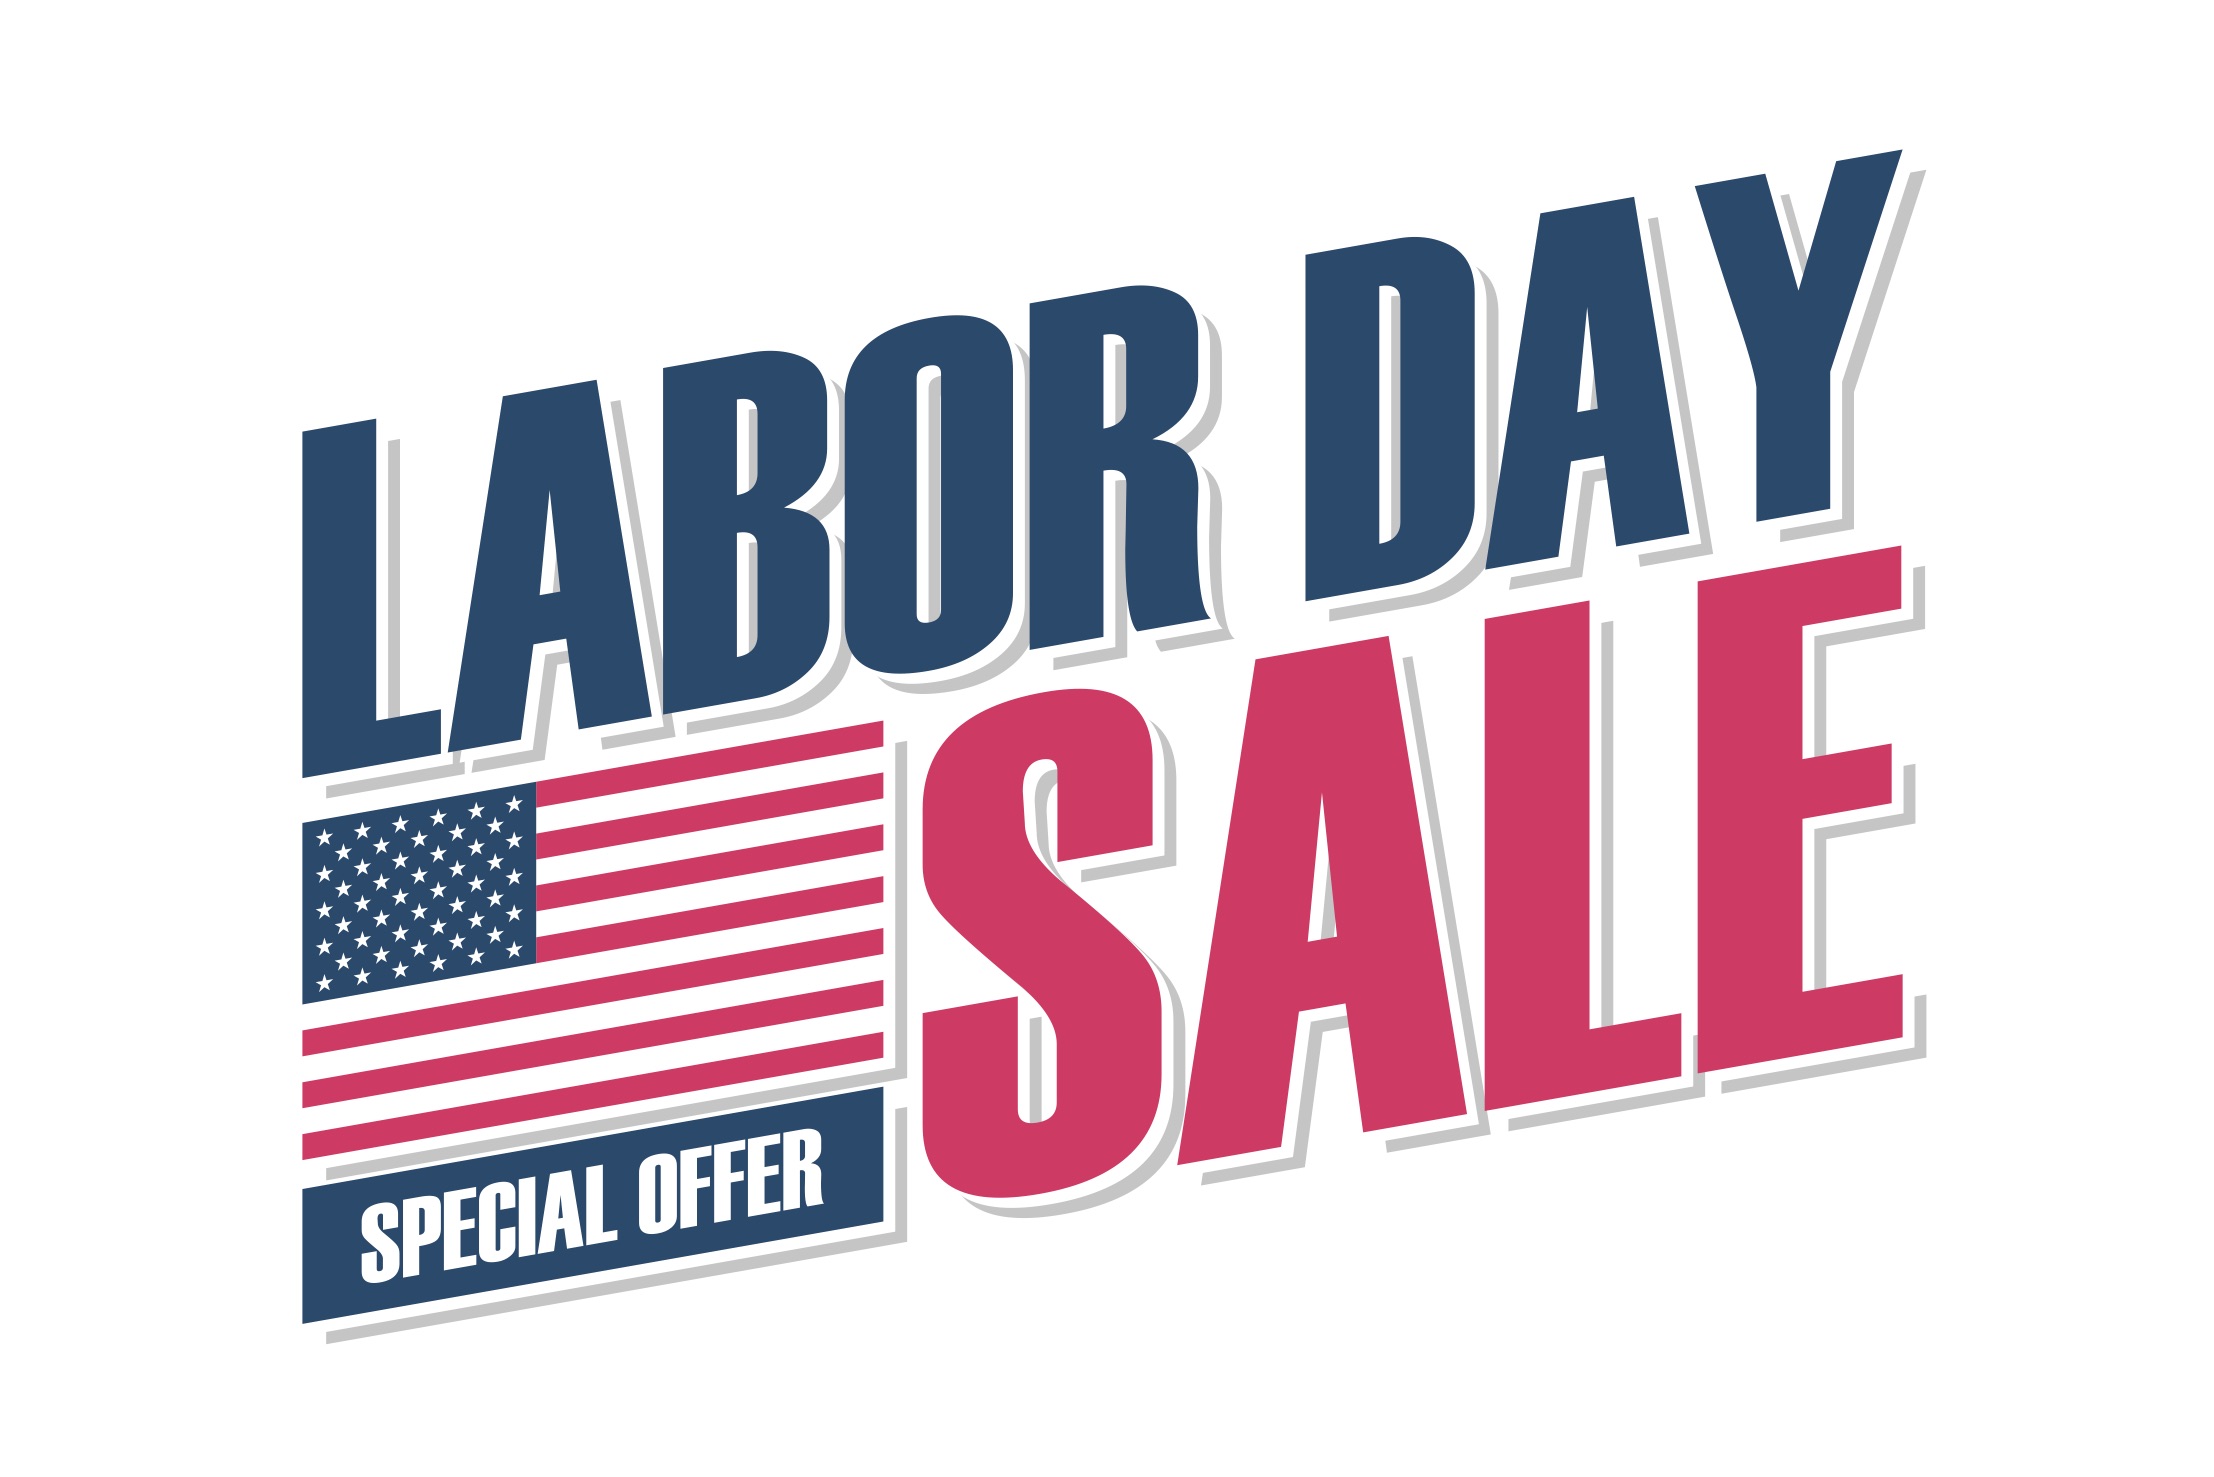 The Best Labor Day Online Sale 2020 Right Now & Through The Weekend